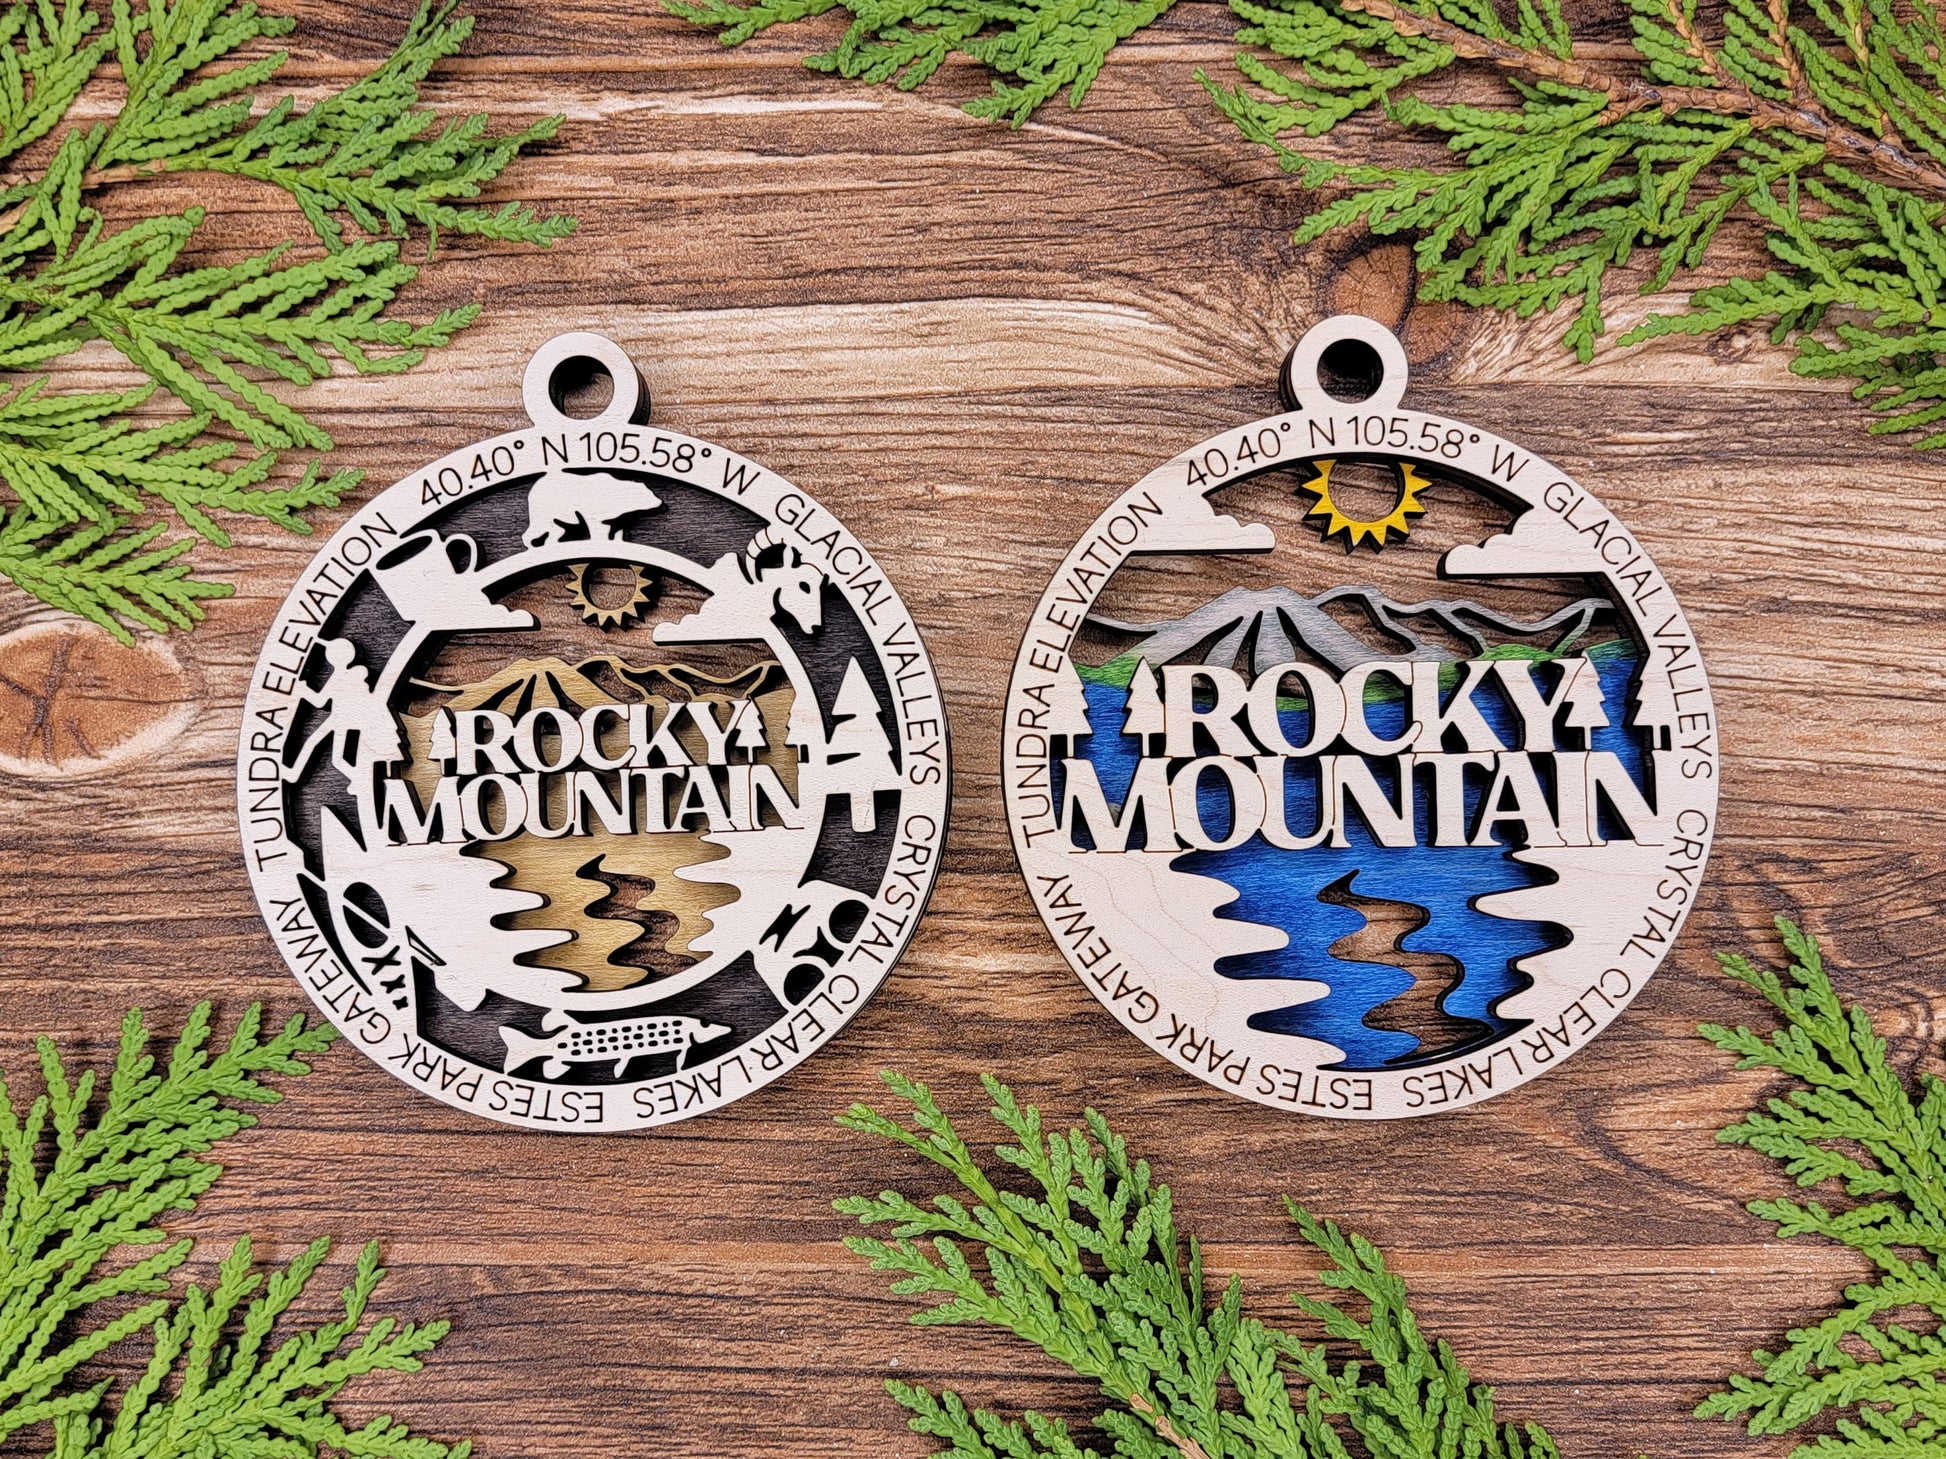 Rocky Mountain Park Ornament - Includes 2 Ornaments - Laser Design SVG, PDF, AI File Download - Tested On Glowforge and LightBurn